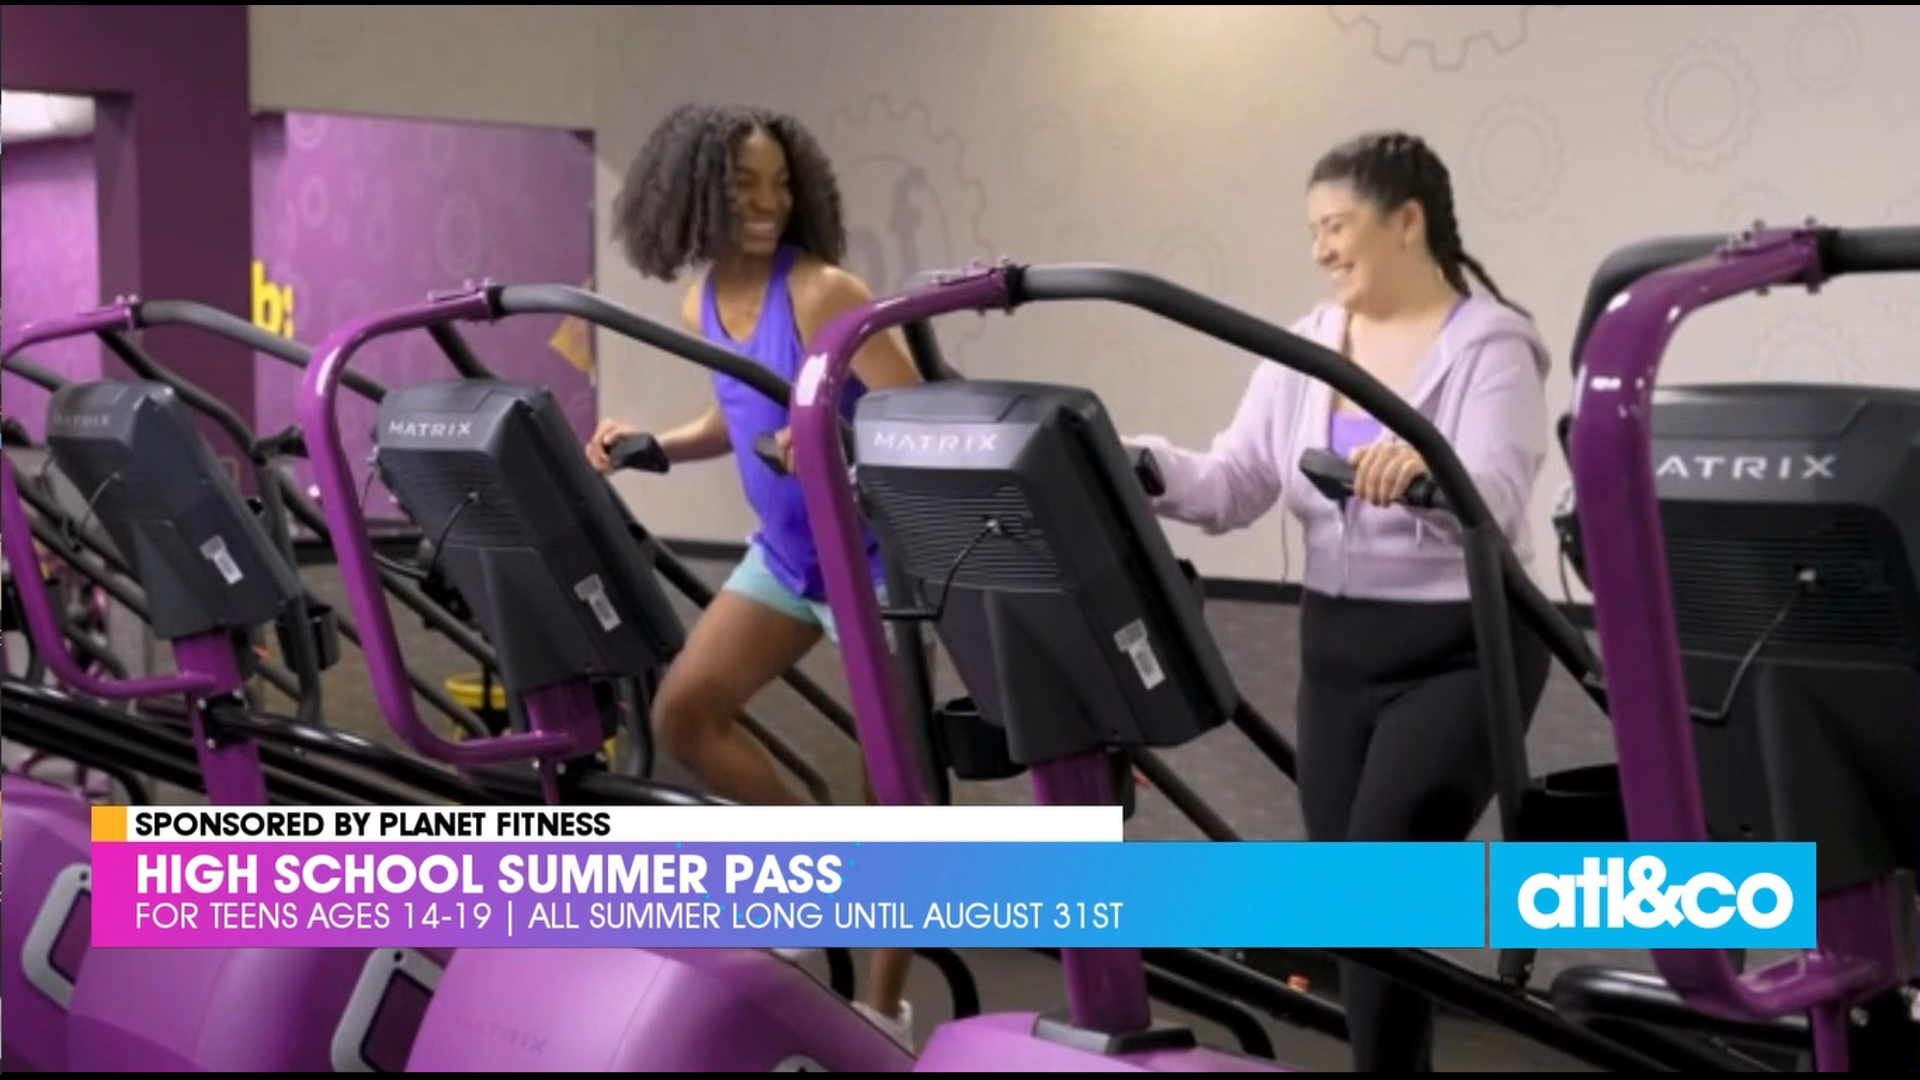 See how Planet Fitness is helping teens reclaim their physical fitness with a free summer pass at any of their locations.